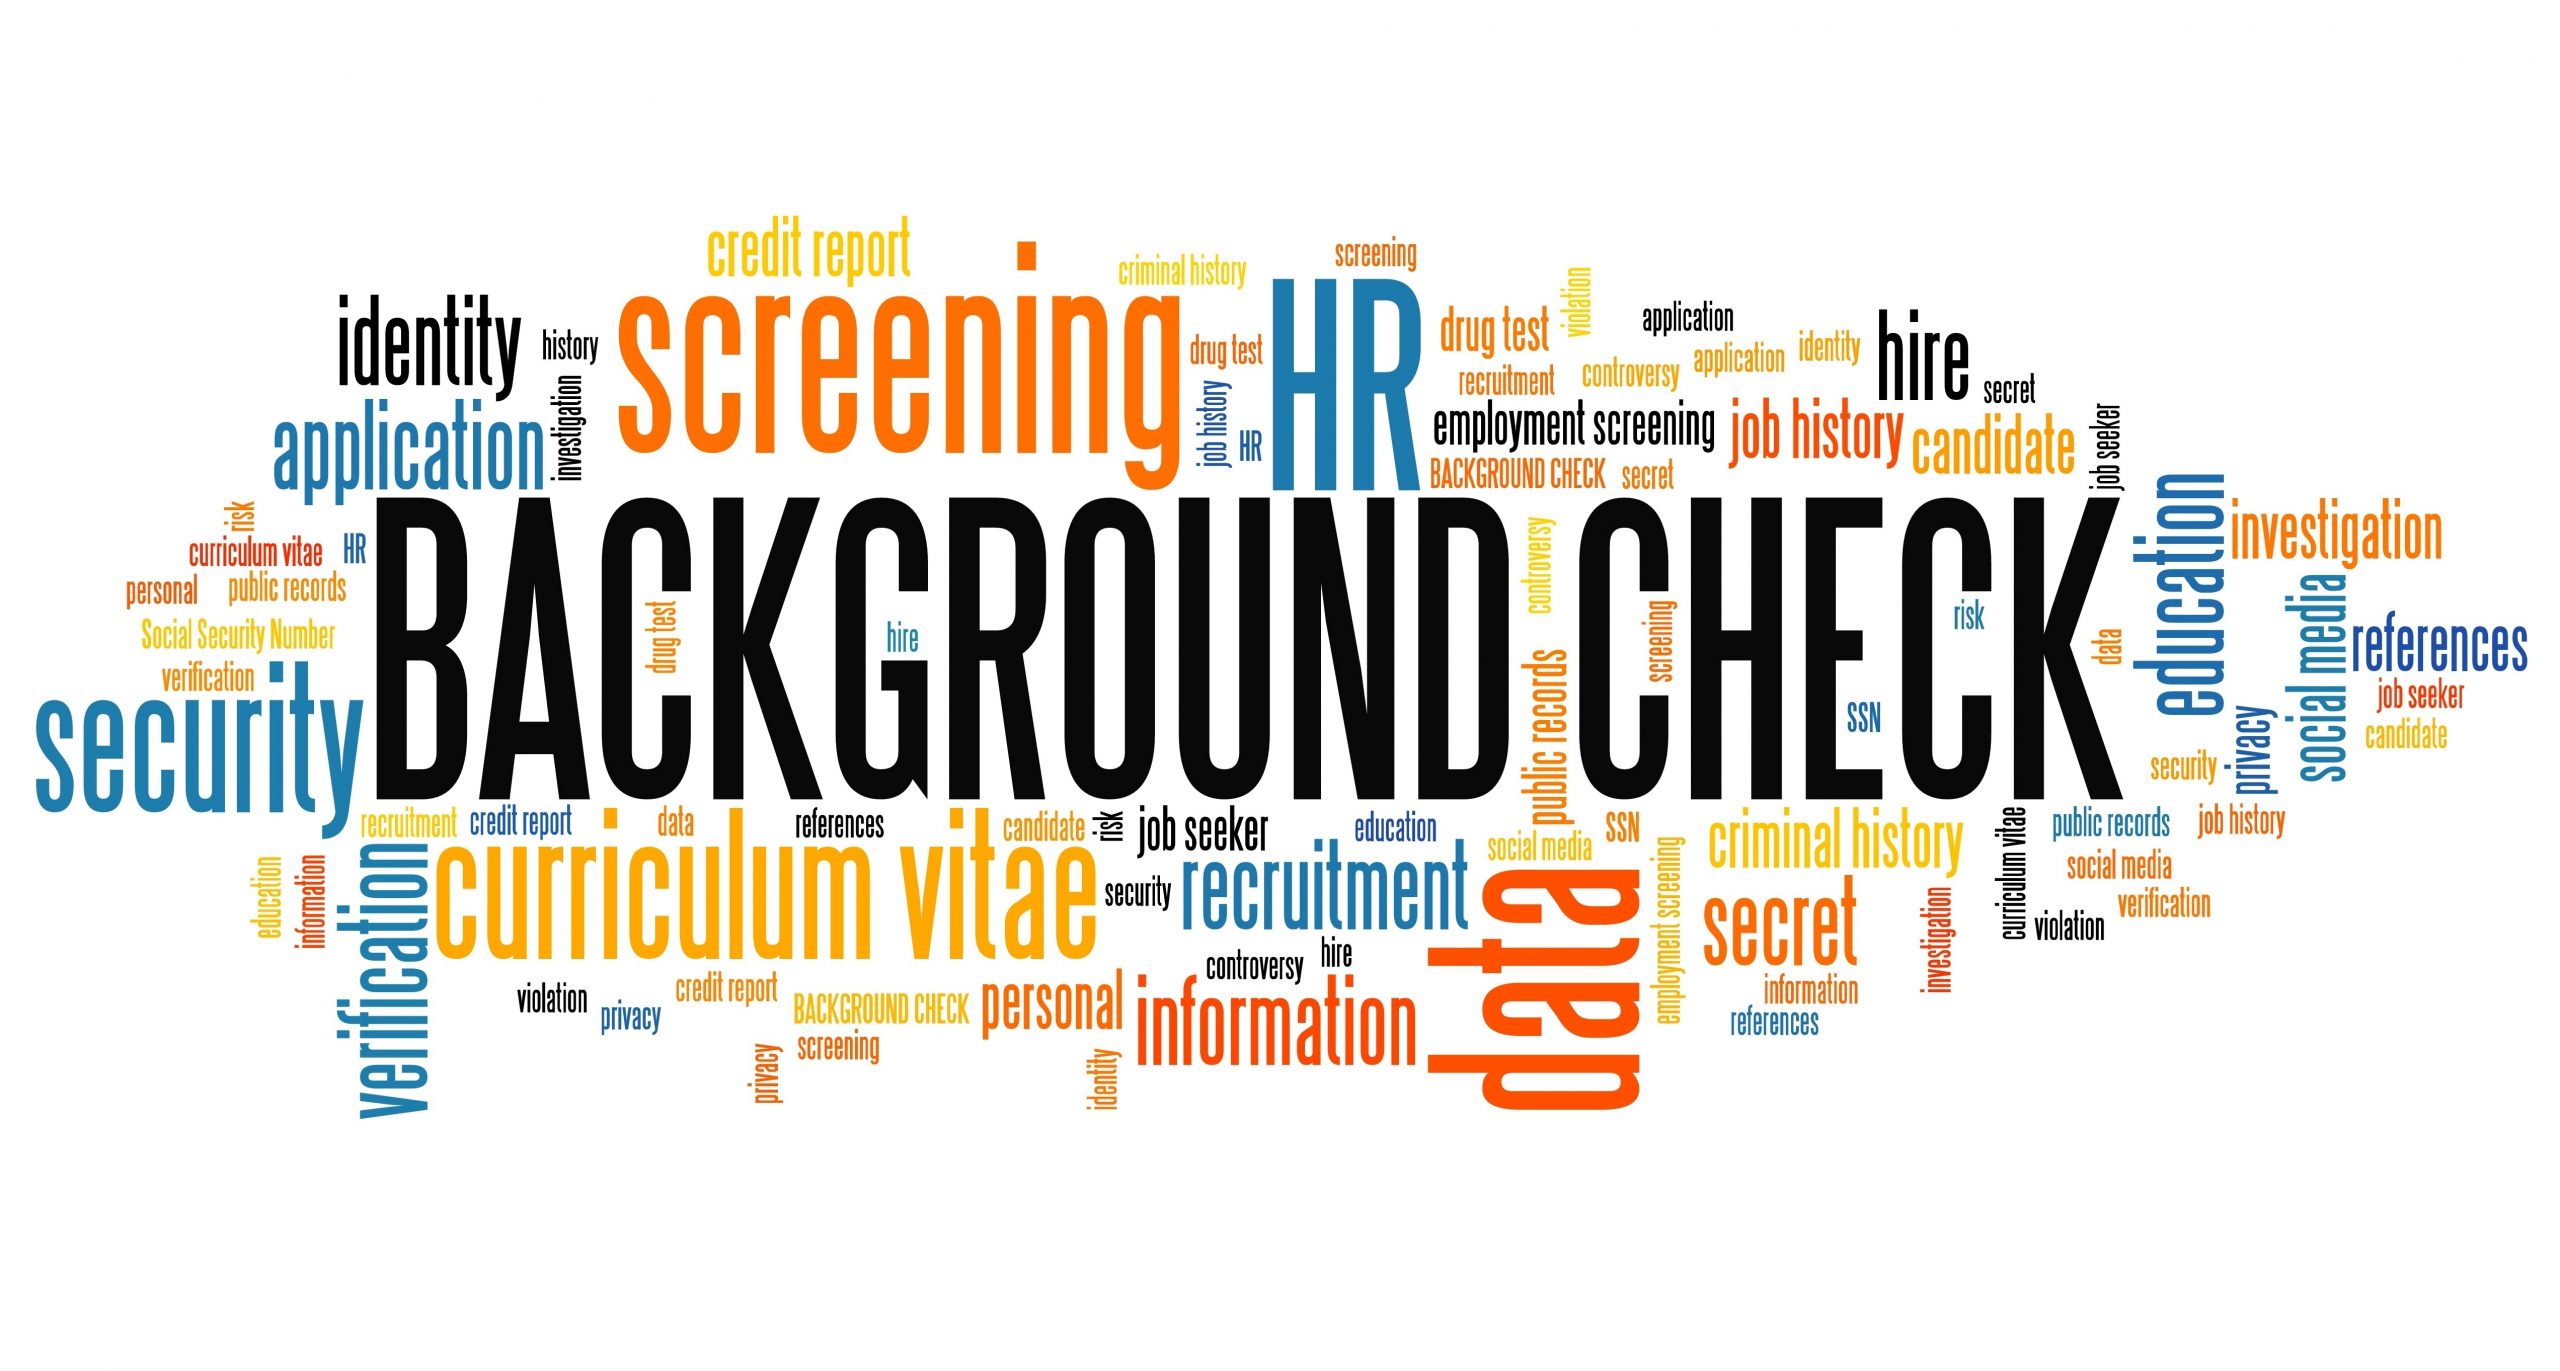 Employee Screening and the Importance of Background Checks